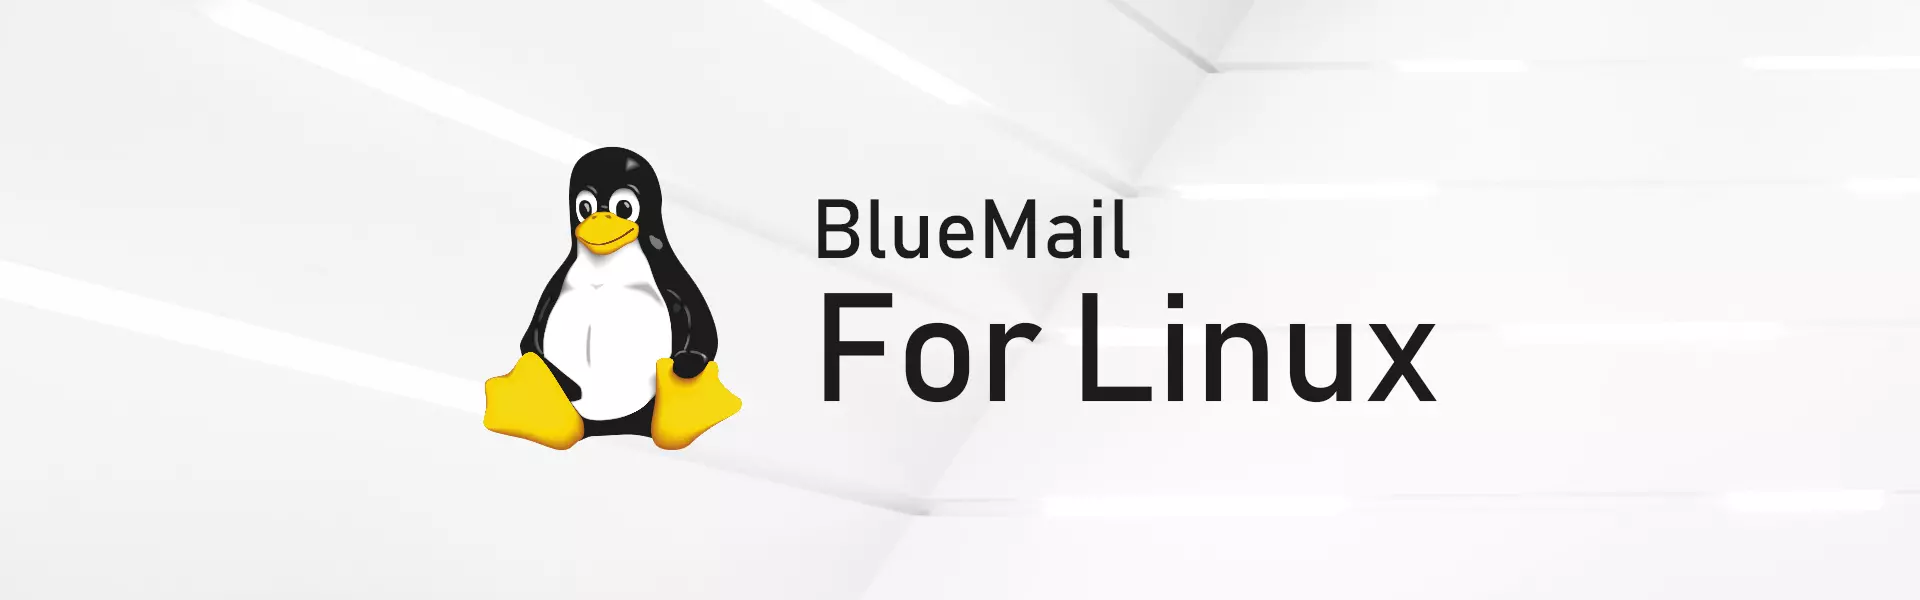 BlueMail BlueMail Expands to Millions of Consumers and Businesses with Support for Linux